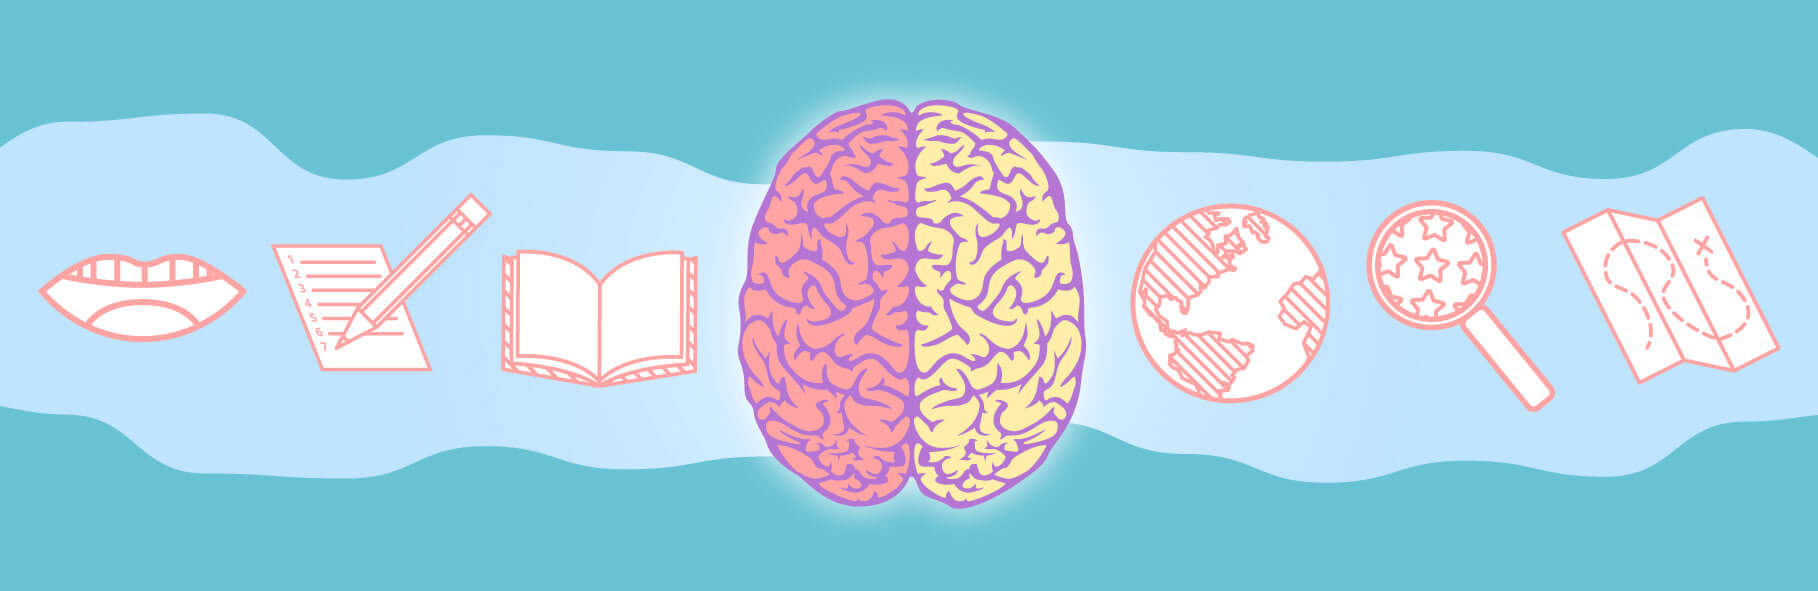 What Happens When We Teach a Right-Brained Learner in a Left-Brained Fashion?